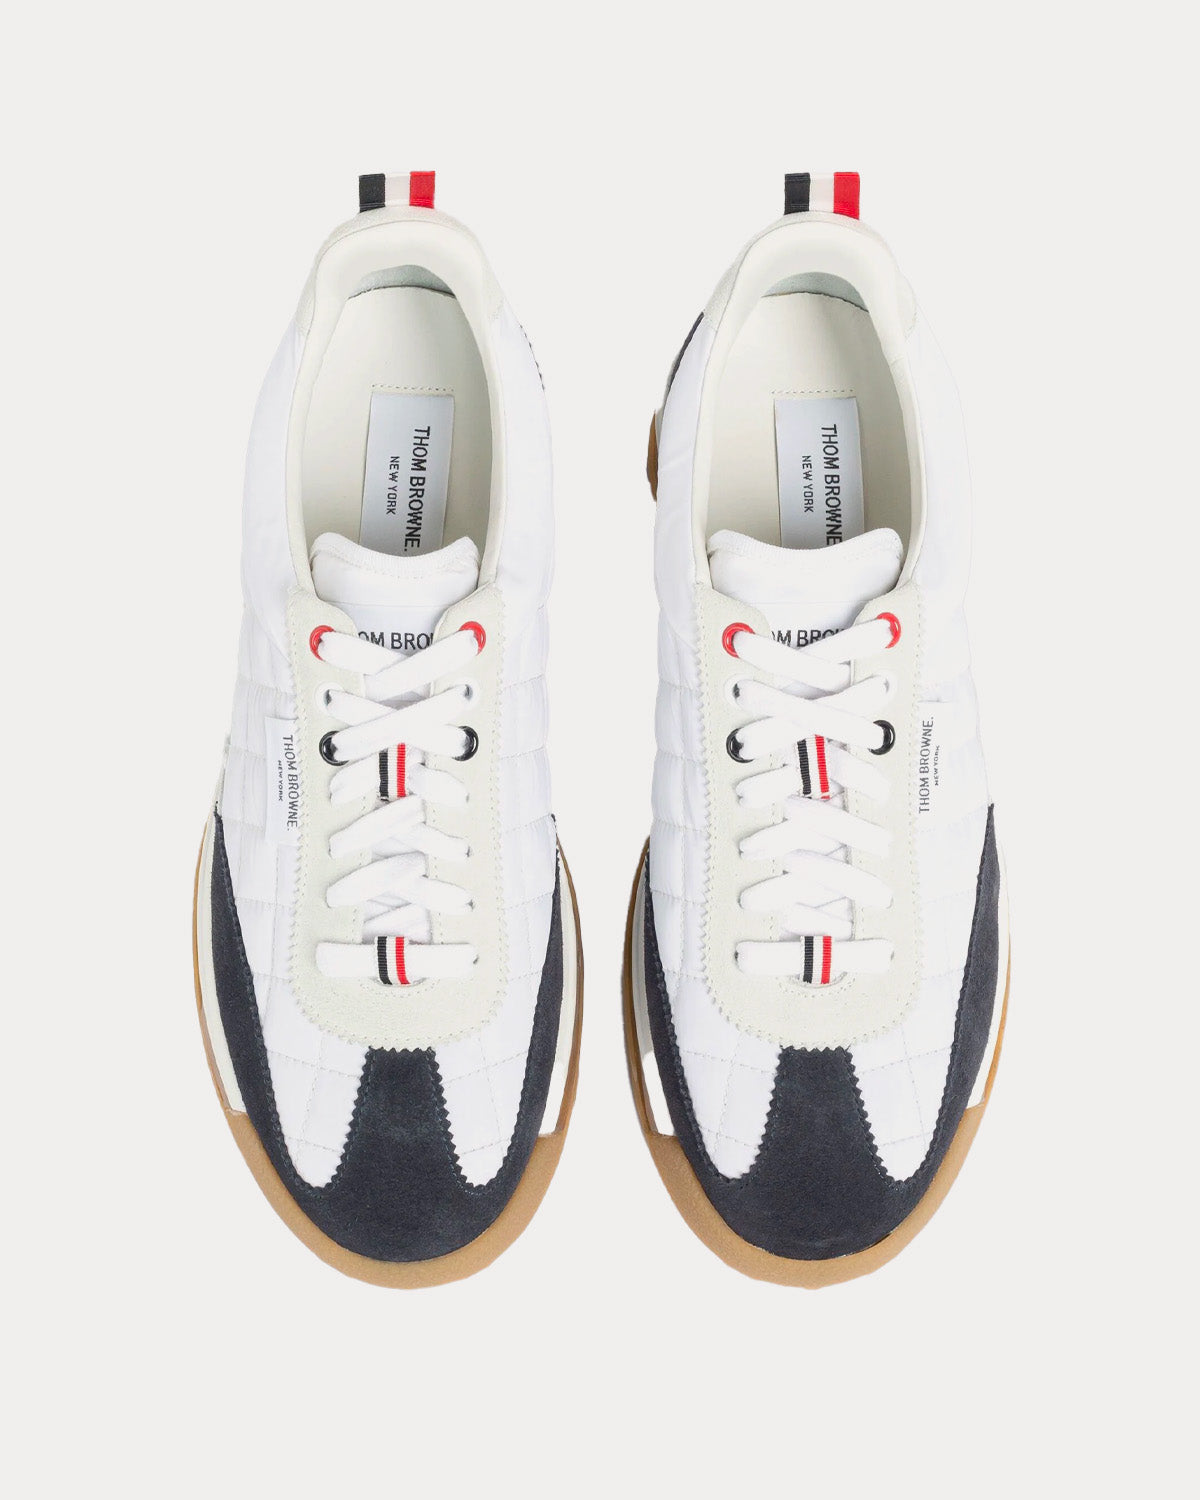 Thom Browne - Tech Runner Clear Sole Quilted Navy / White Low Top Sneakers